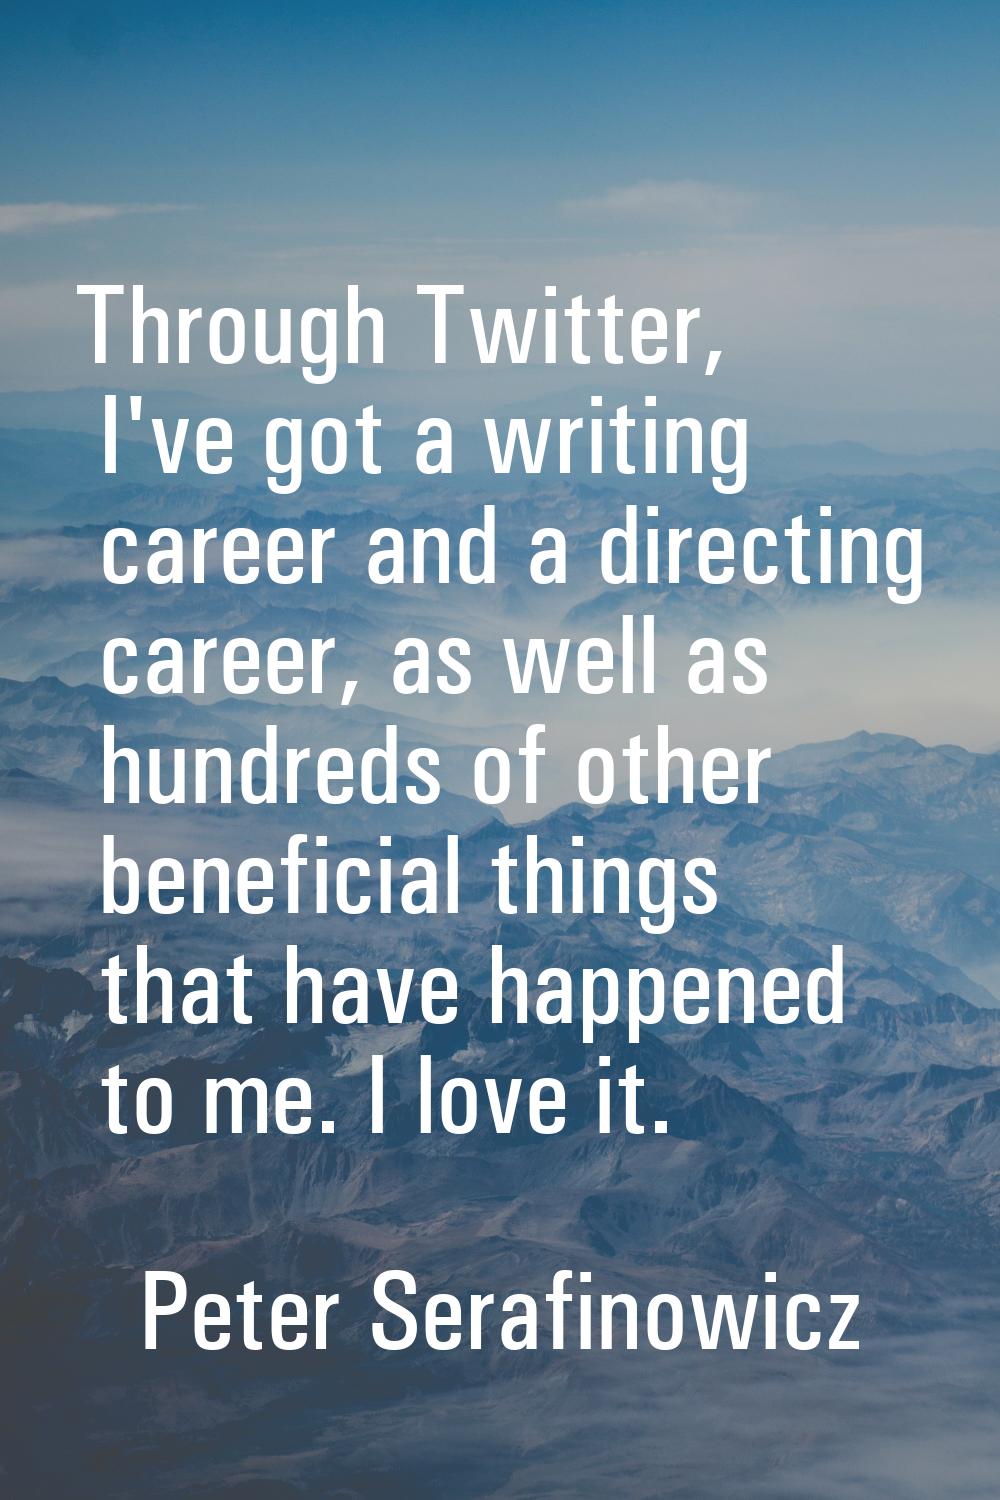 Through Twitter, I've got a writing career and a directing career, as well as hundreds of other ben